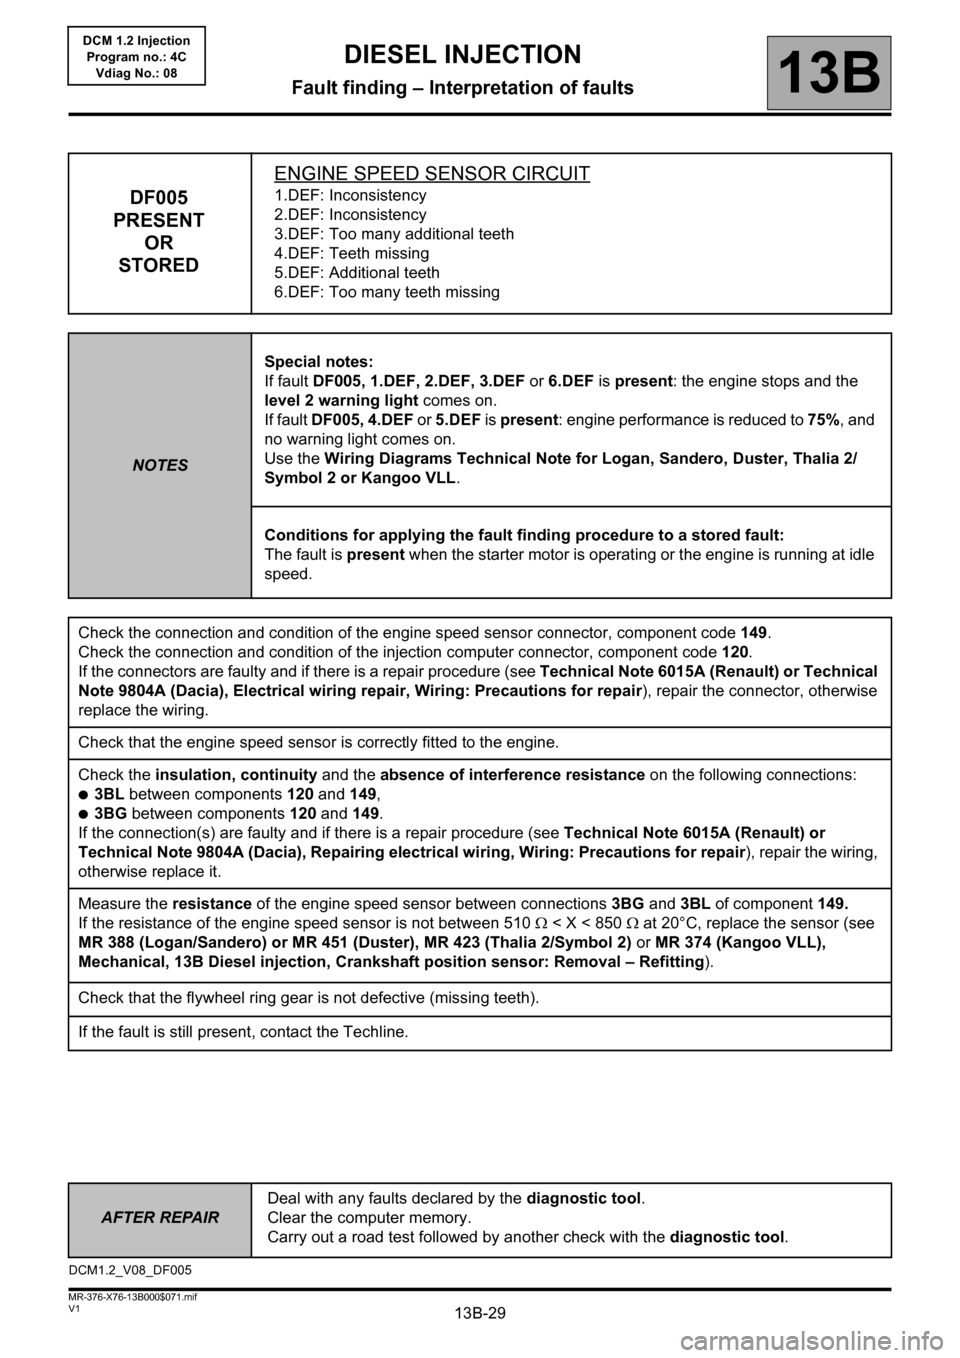 RENAULT KANGOO 2013 X61 / 2.G Diesel DCM 1.2 Injection Owners Manual 13B-29
AFTER REPAIRDeal with any faults declared by the diagnostic tool. 
Clear the computer memory.
Carry out a road test followed by another check with the diagnostic tool.
V1 MR-376-X76-13B000$071.